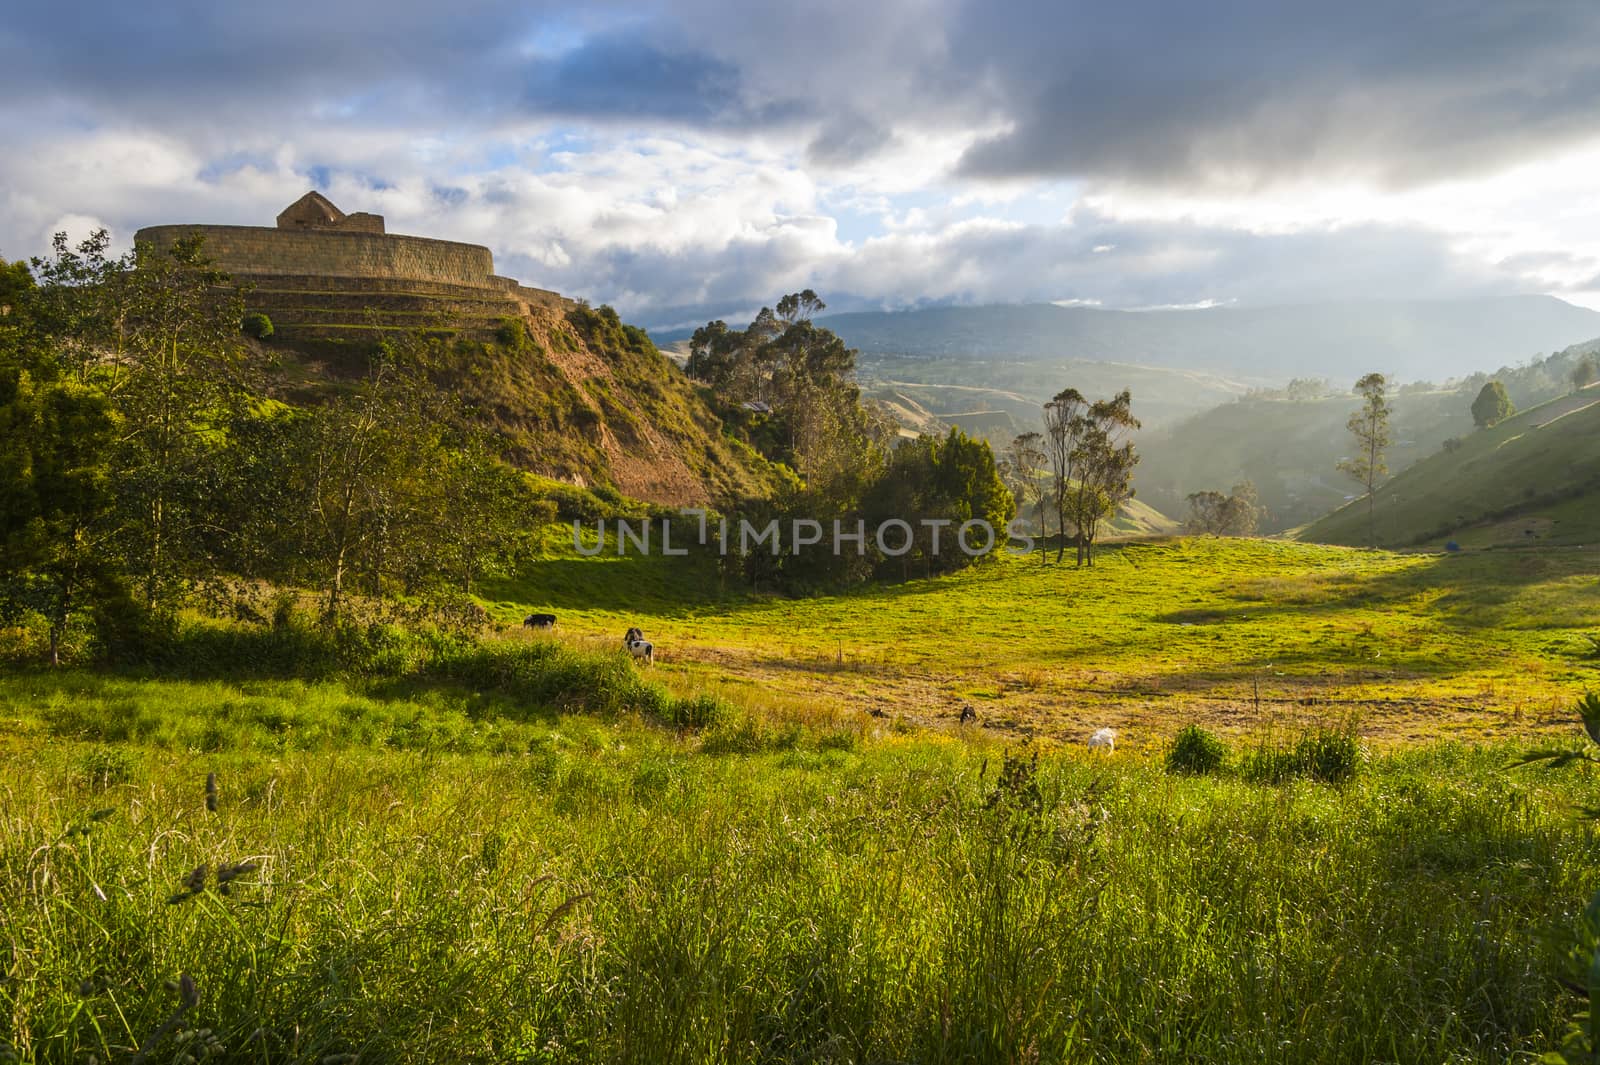 Ingapirca, Inca wall and town, largest known Inca ruins in Ecuad by xura